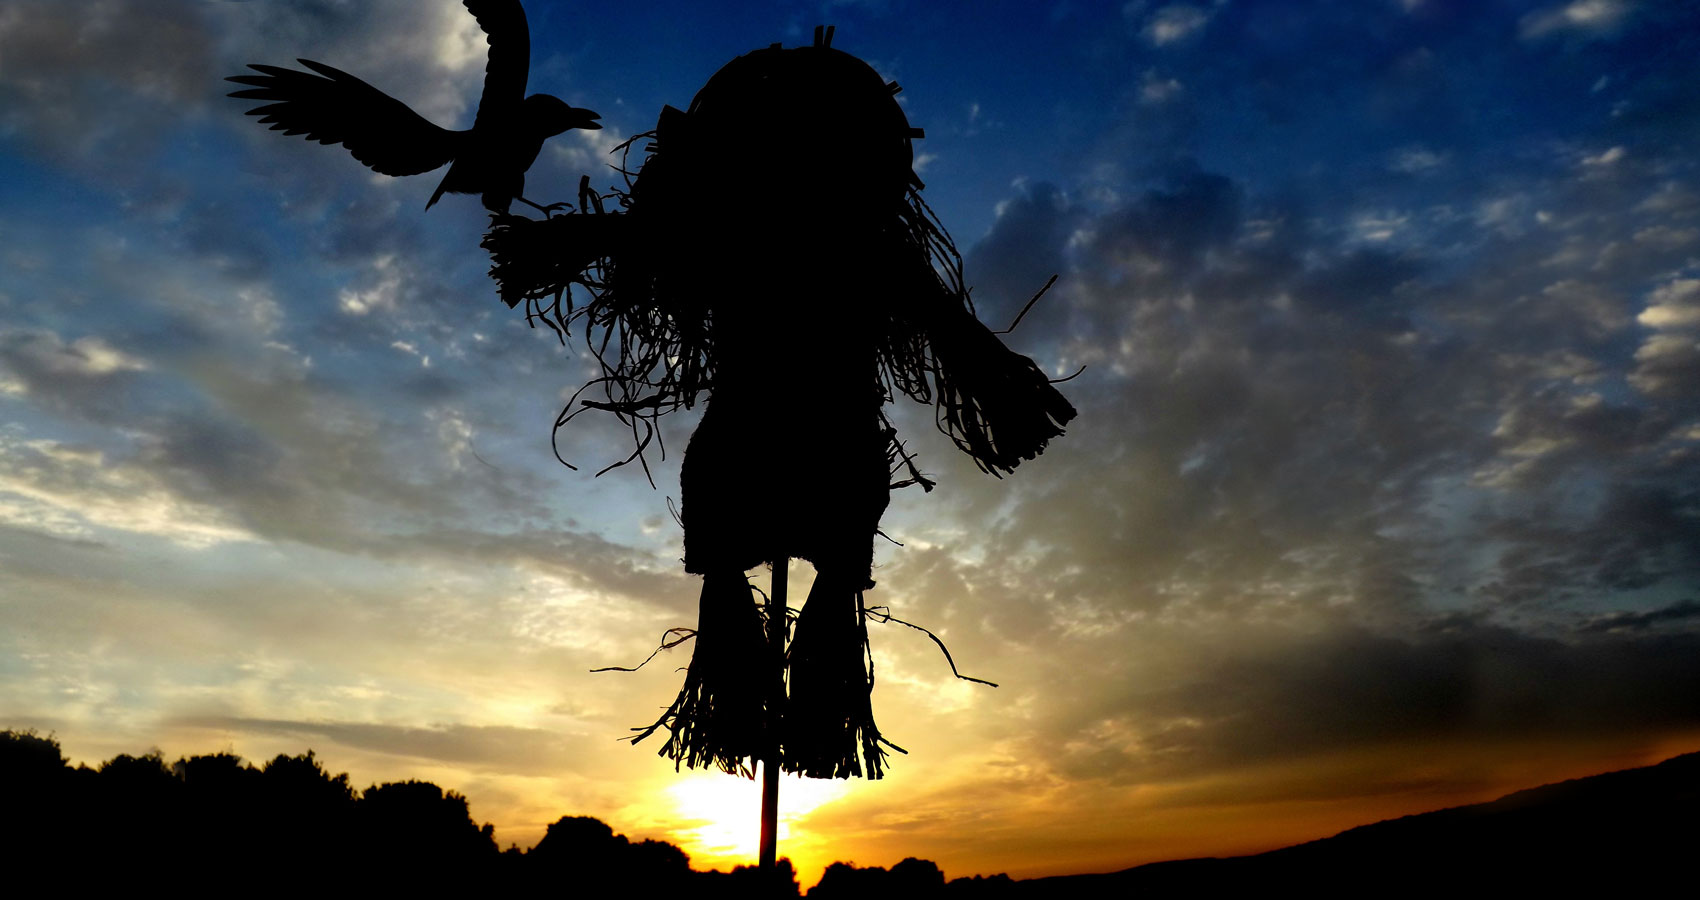 Crucify The Scarecrow, written by Terry Miller at Spillwords.com